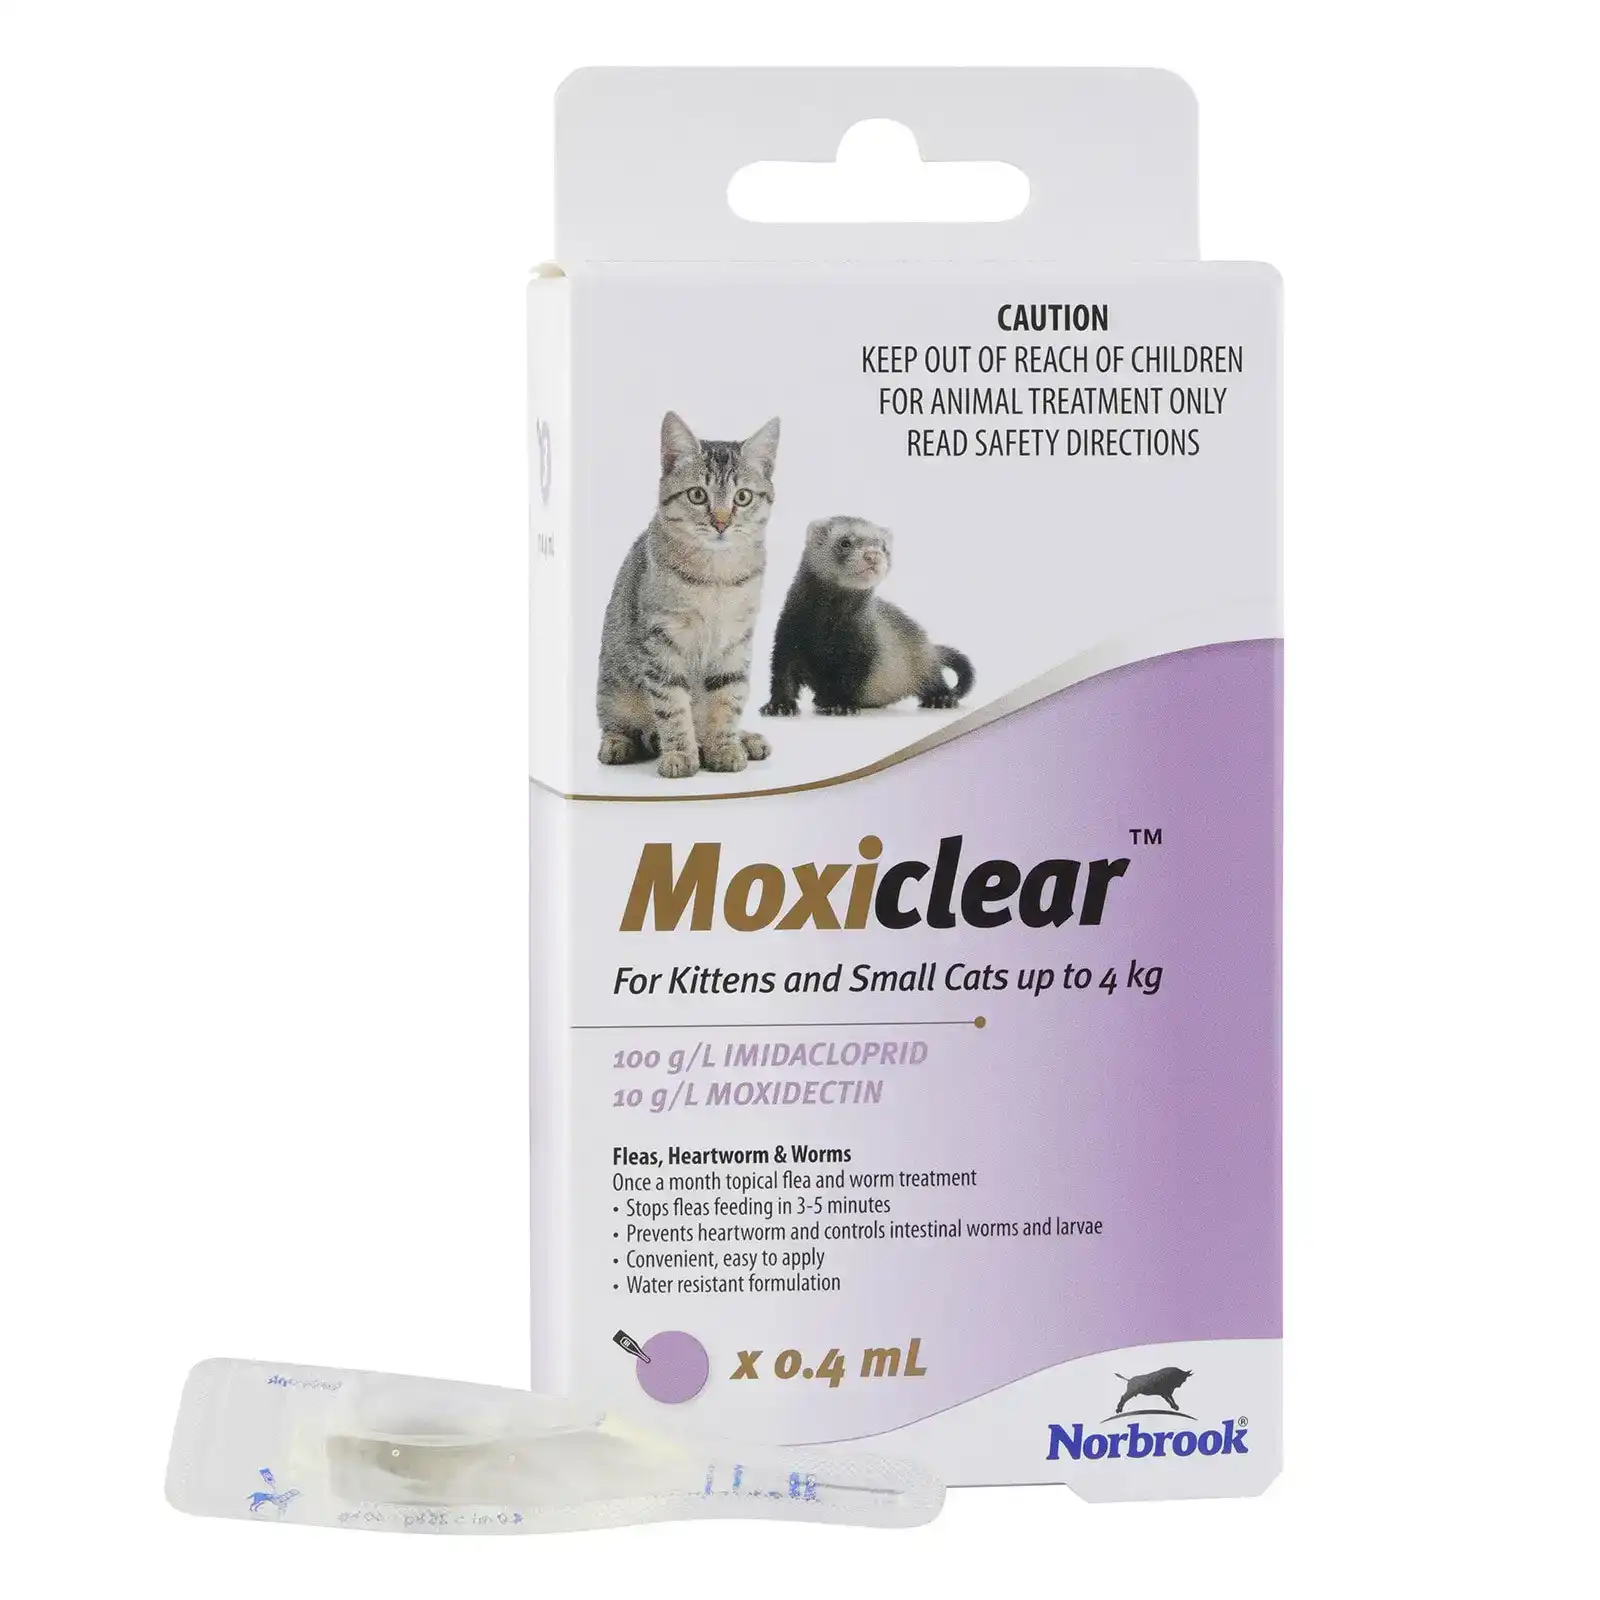 Moxiclear for Kittens and Small Cats Up to 4 Kg (PURPLE) 6 Pipettes